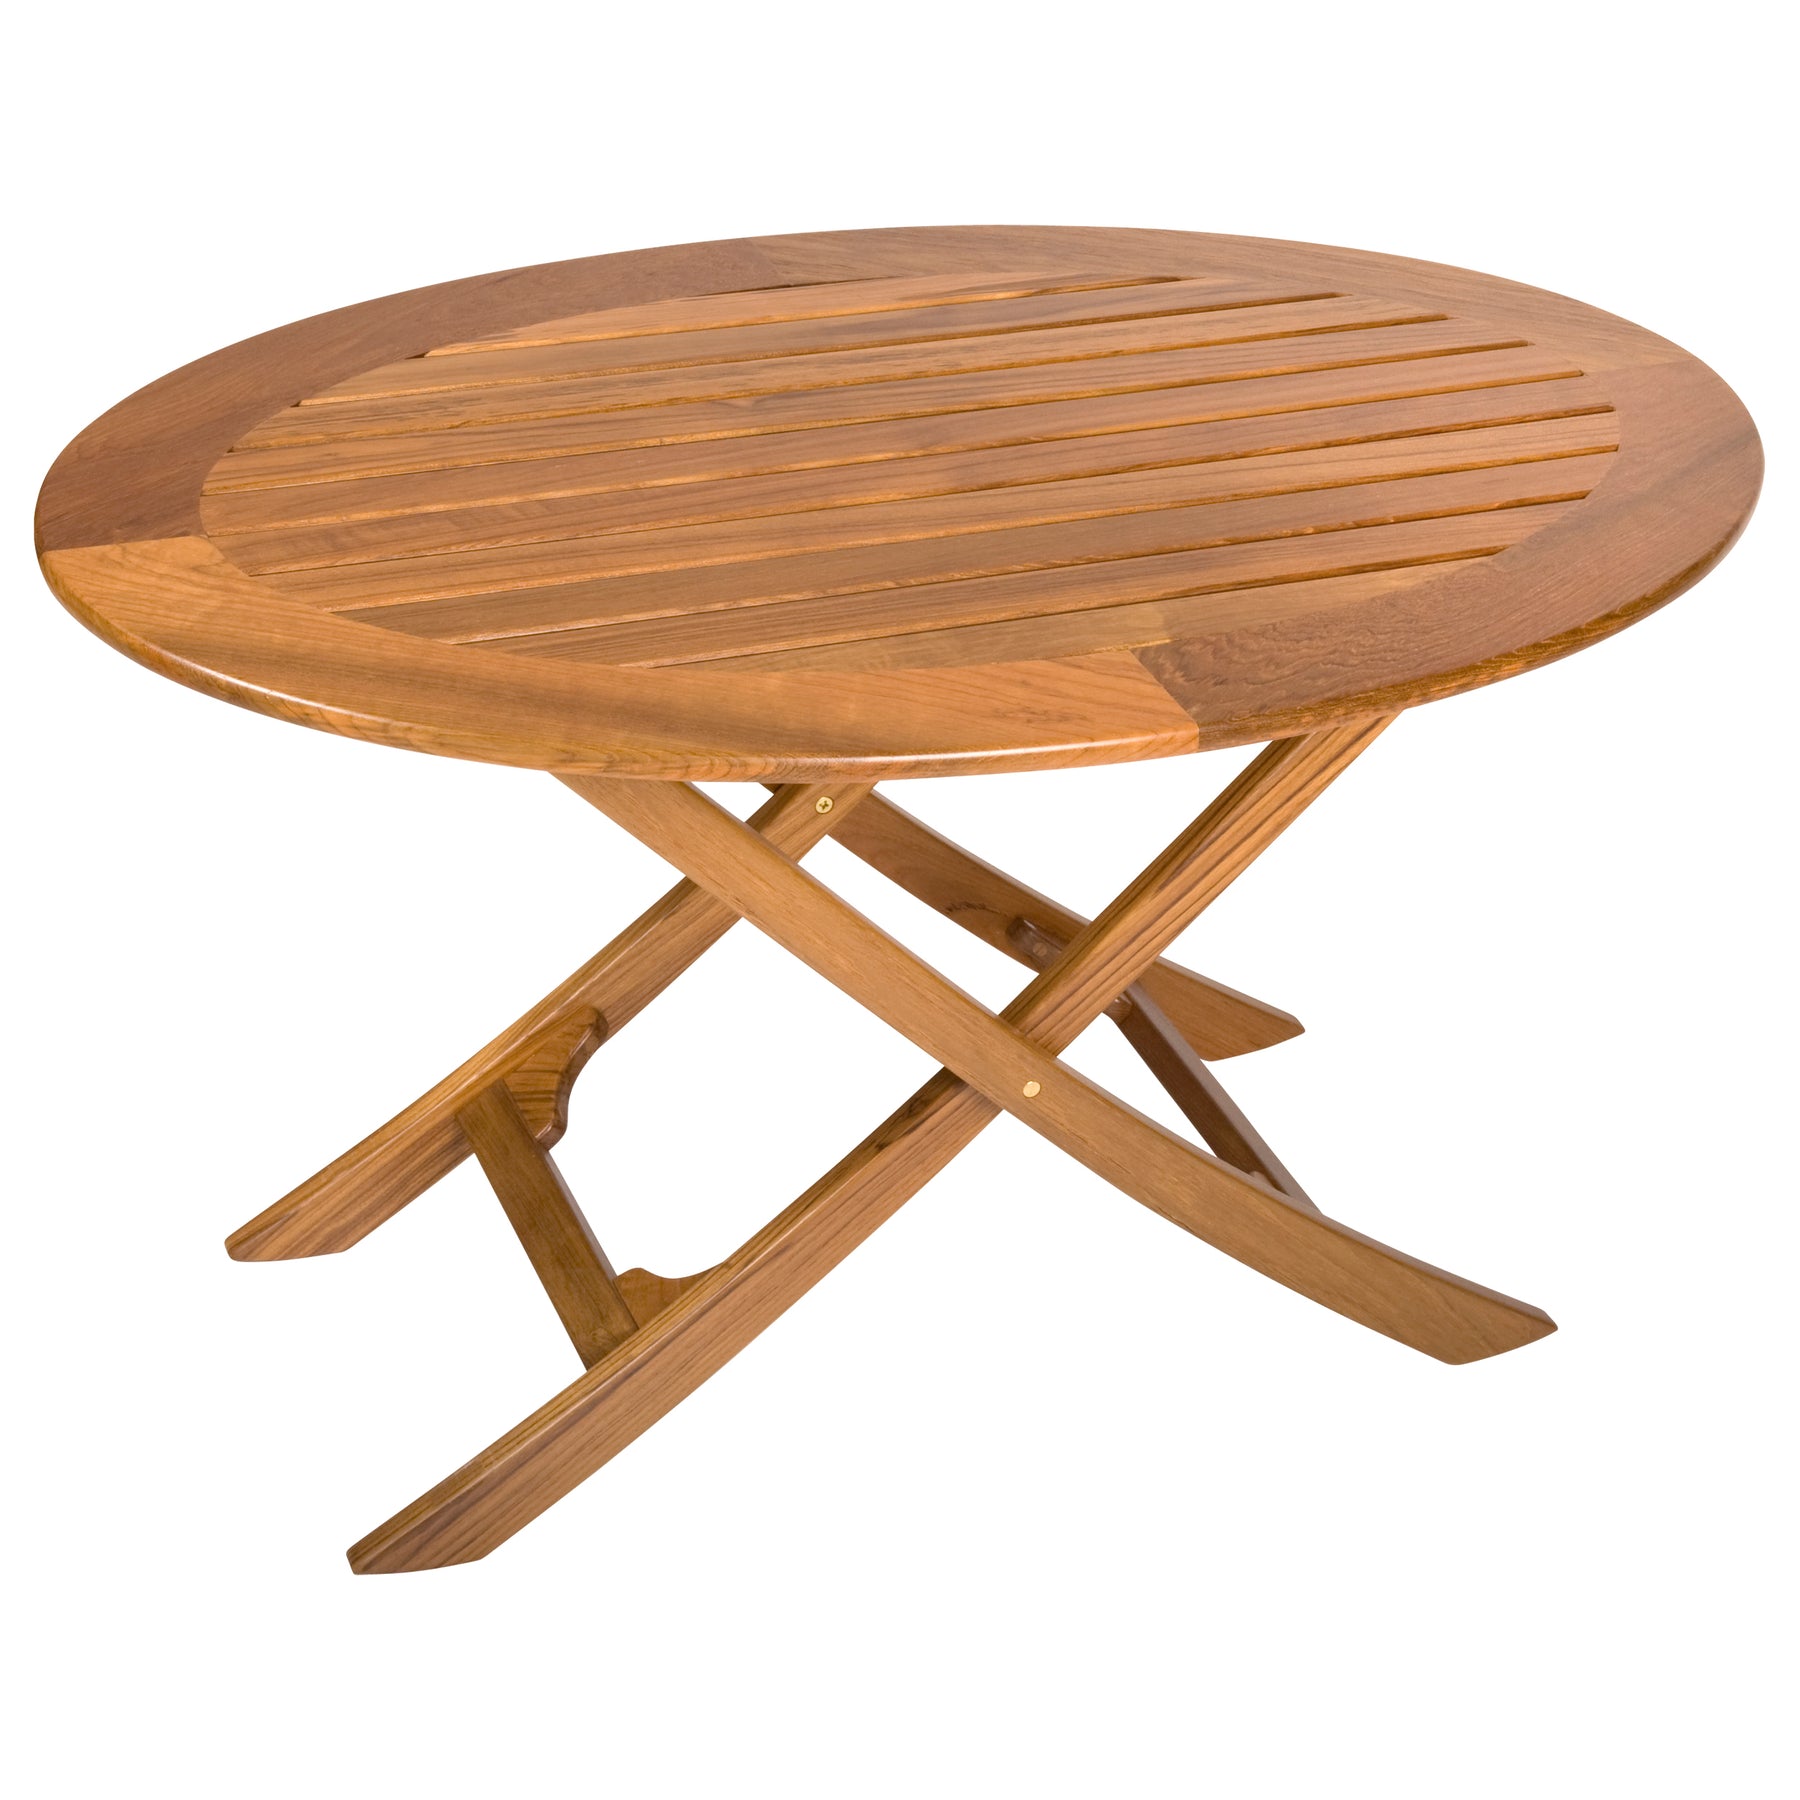 Rembrandt Table - 63037